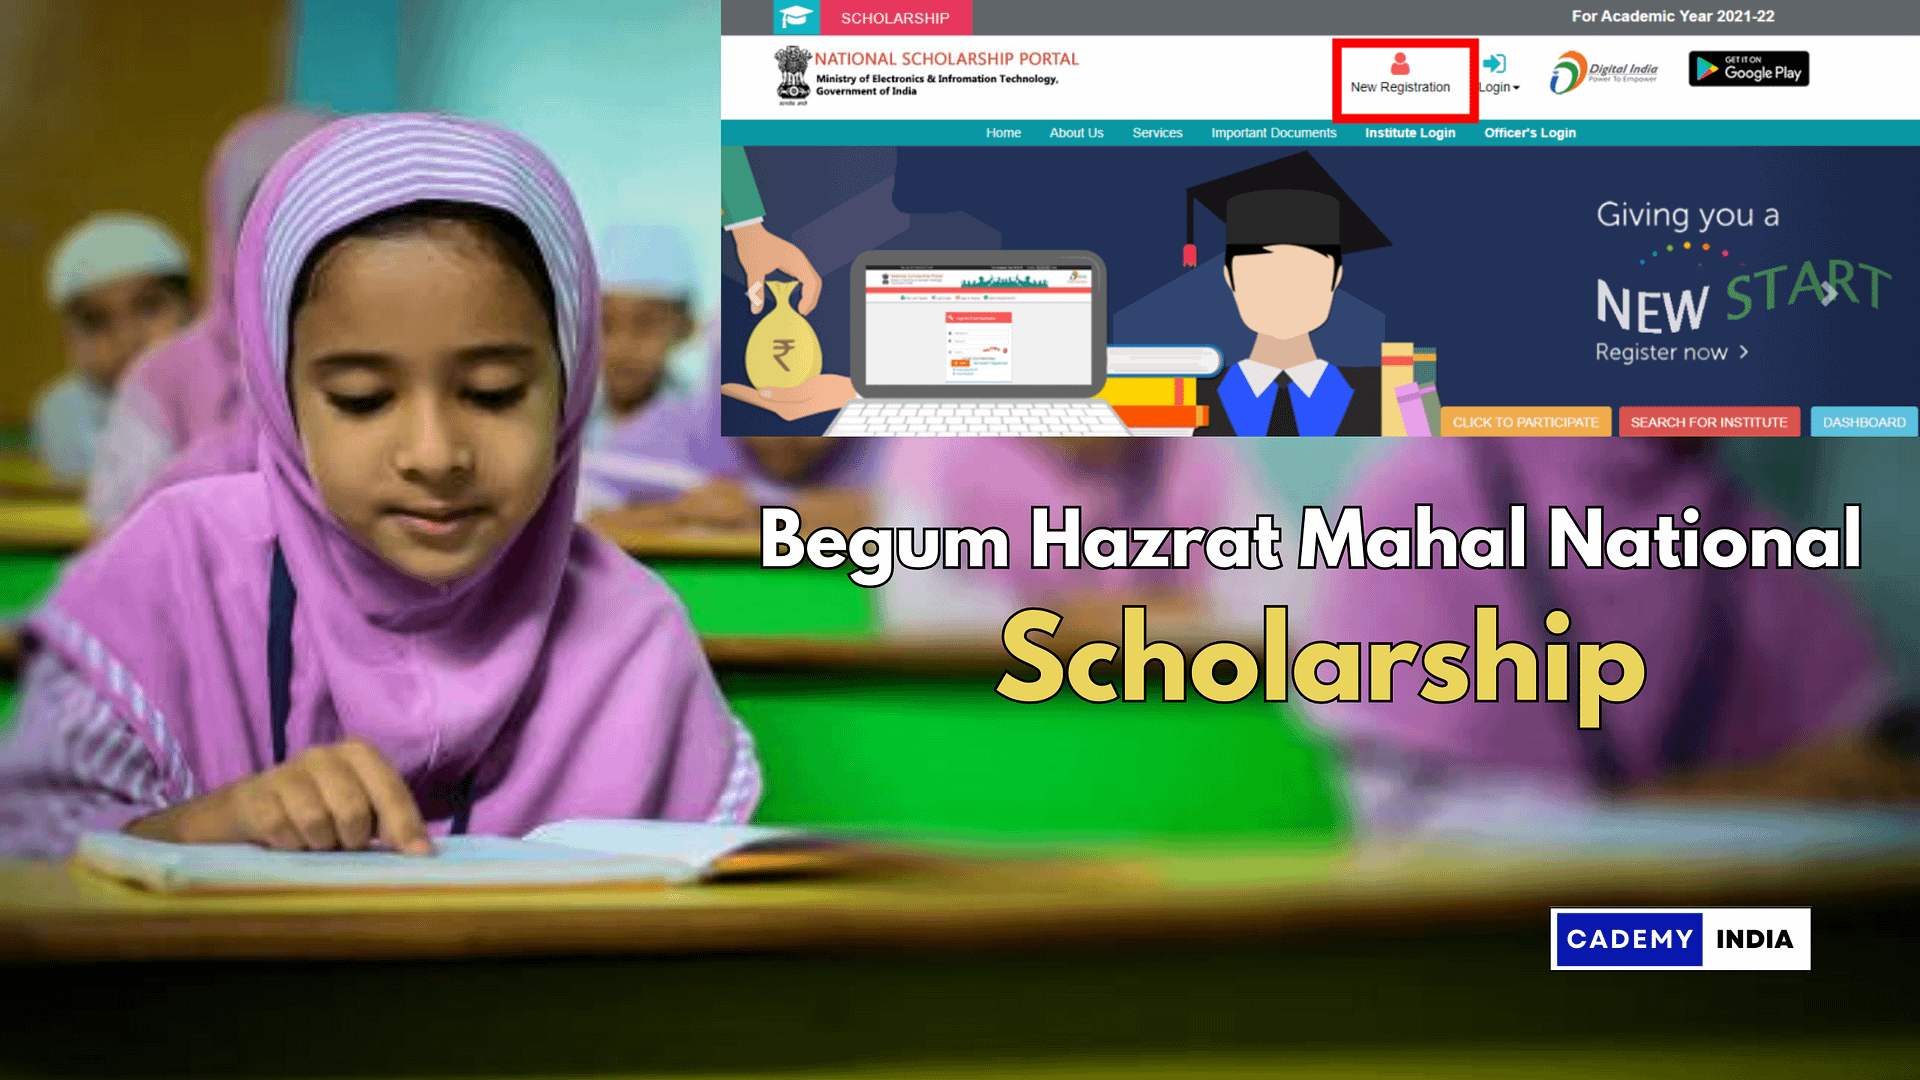 Begum Hazrat Mahal National Scholarship Empowering Girls’ Education: Apply Online for the 2023